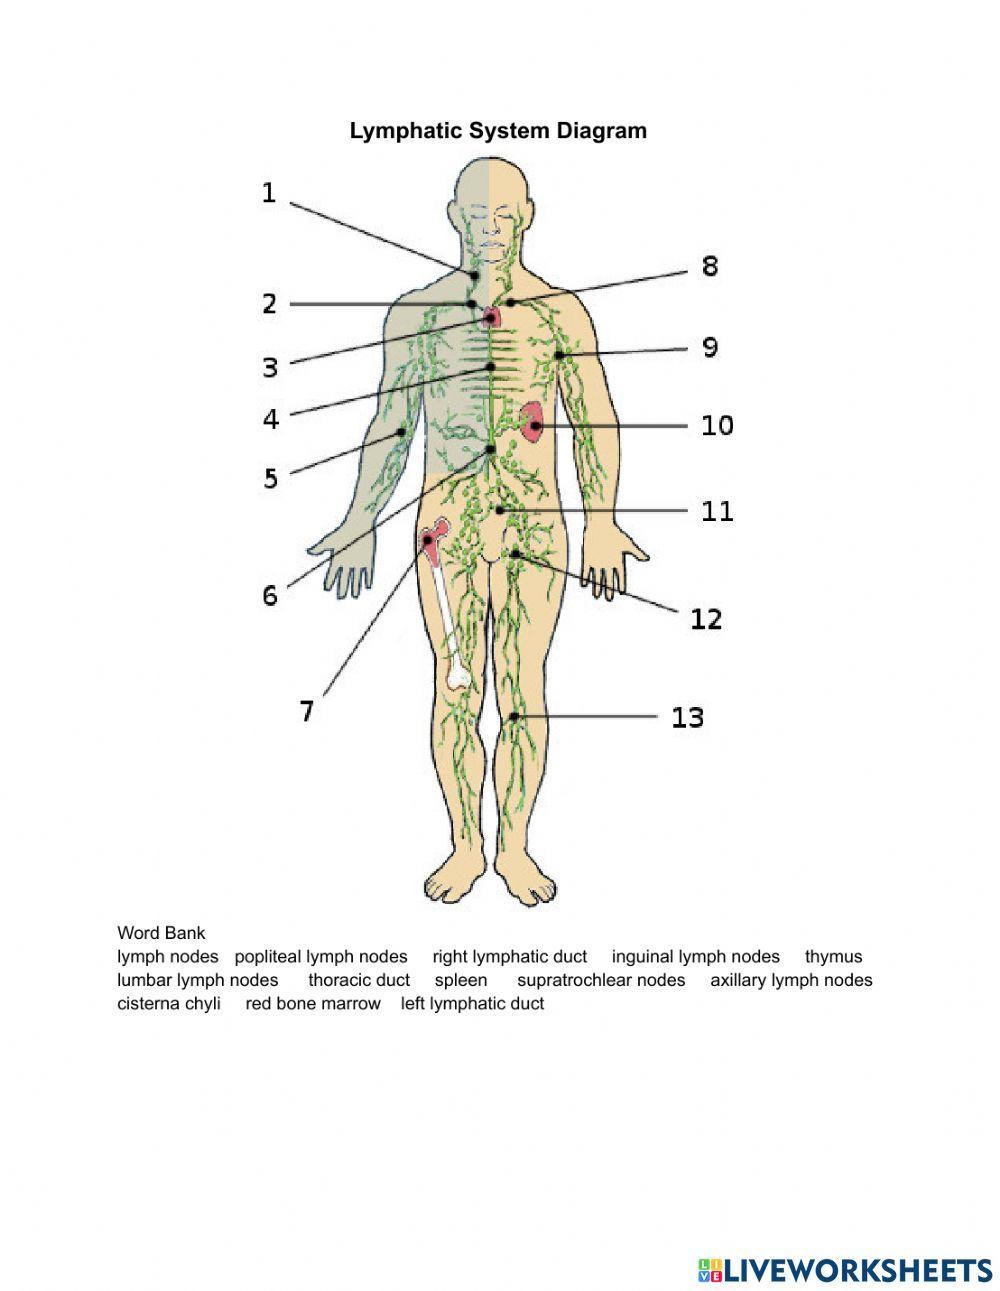 The Lymphatic System Diagram